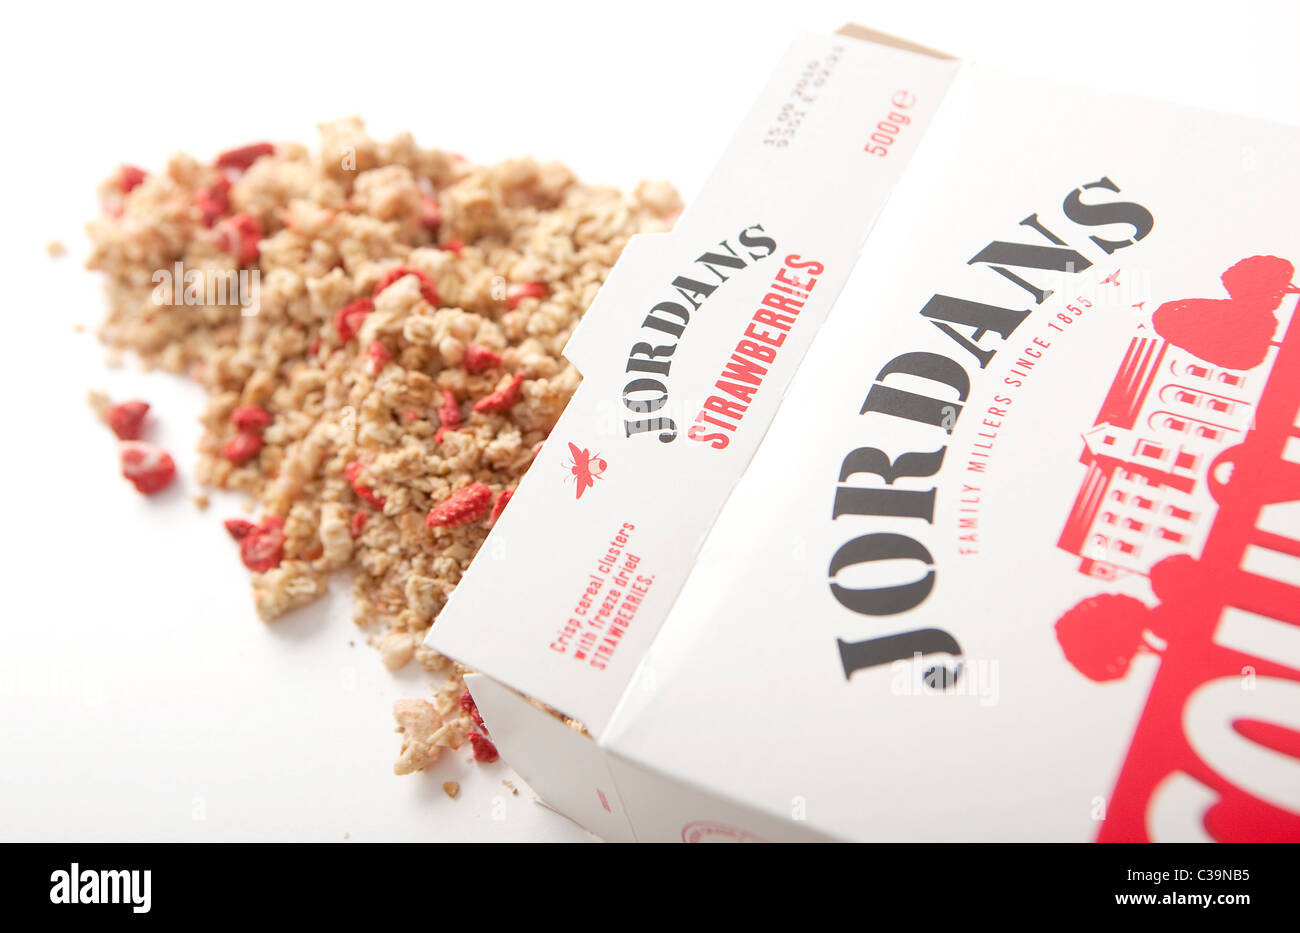 Illustrative image of Jordans Country Crisp cereal, a brand operated by Associated British Foods. Stock Photo